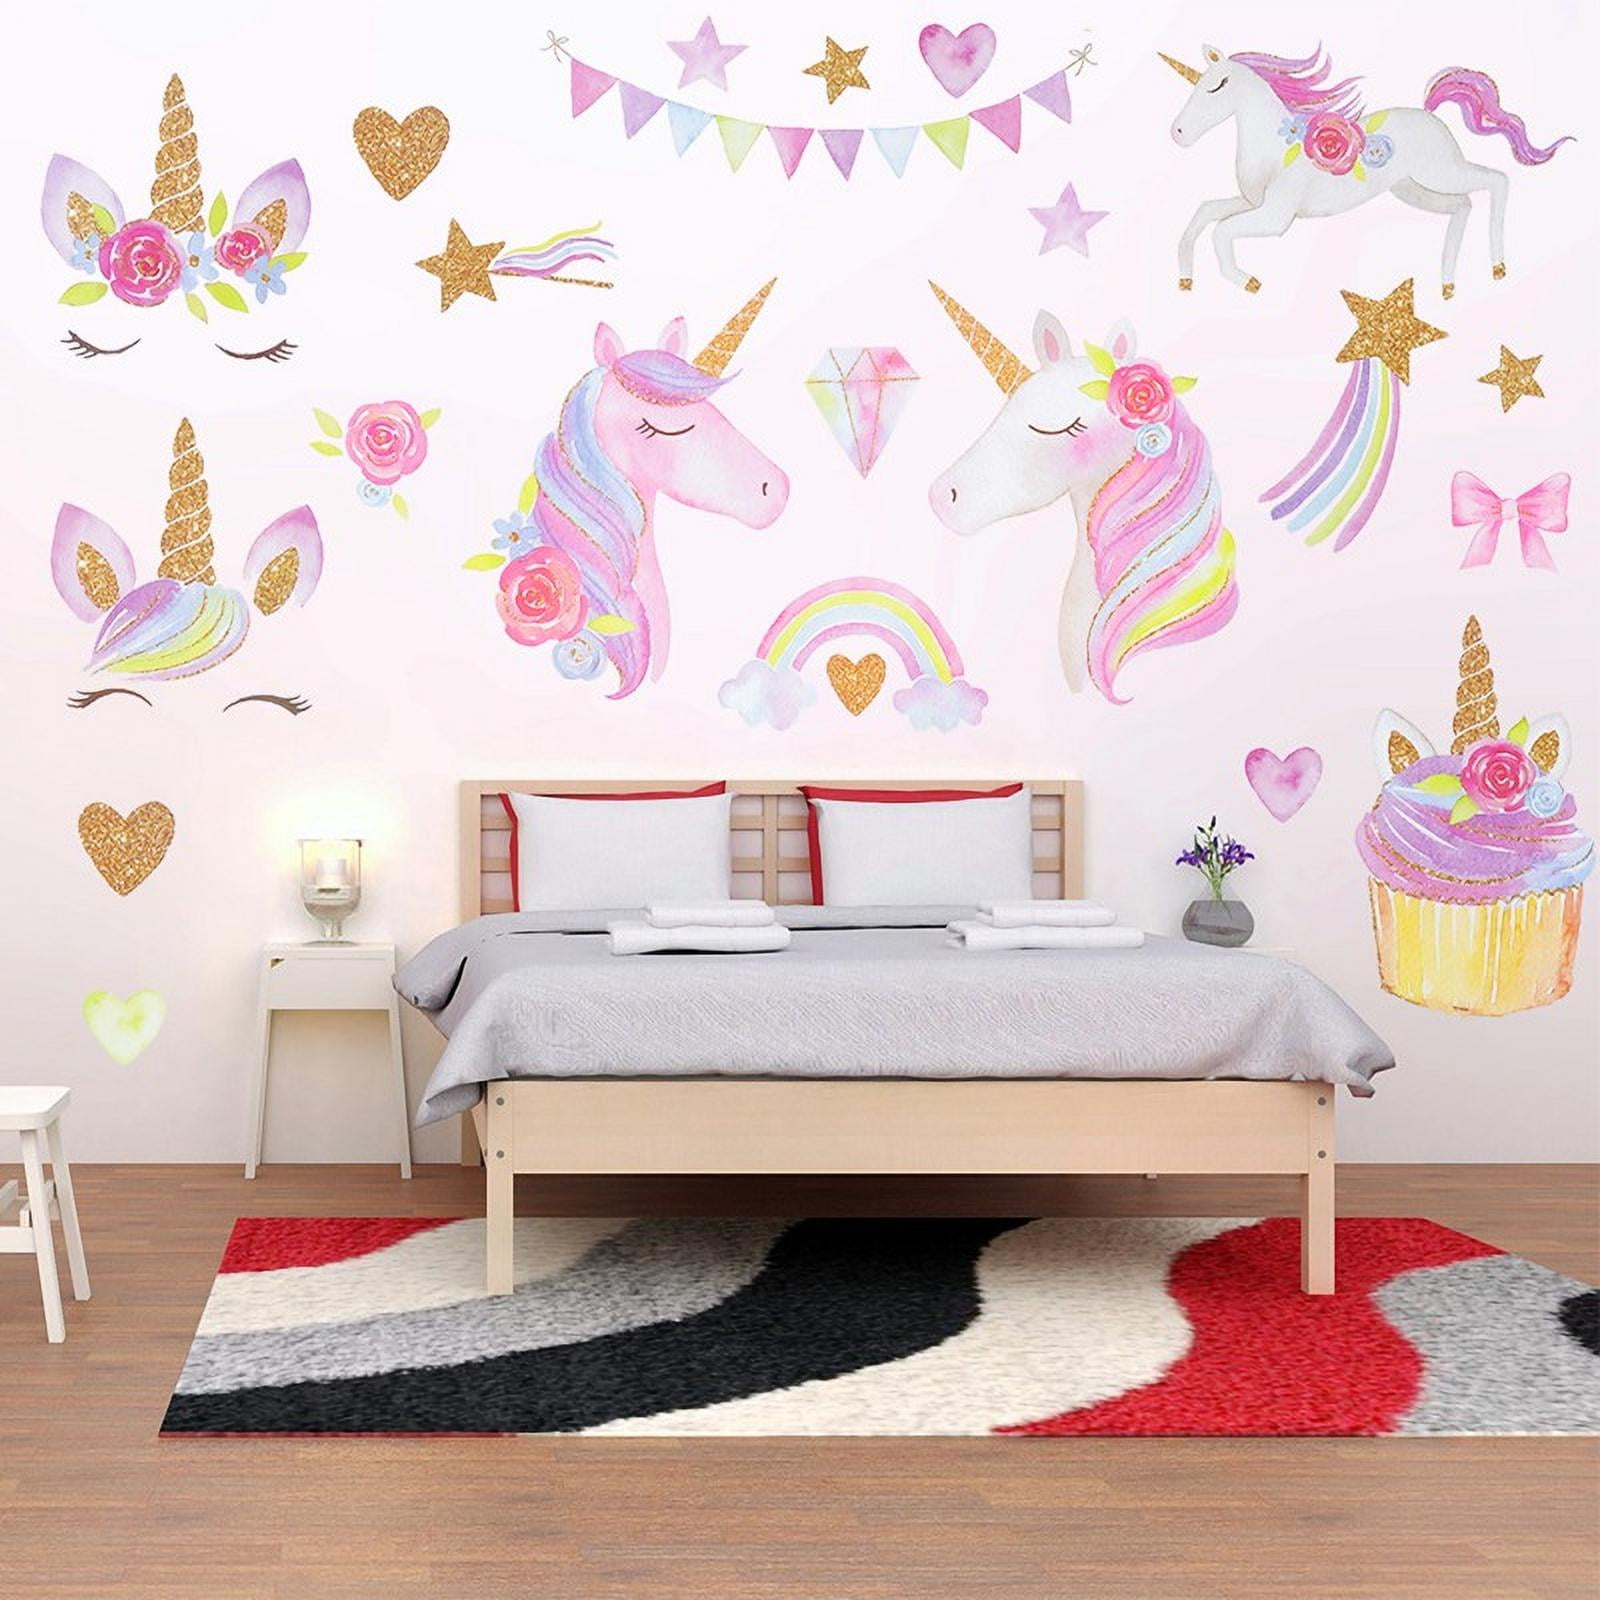 3 Sheets Unicorn Wall Decals Removable Unicorn Wall Sticker Decor for Girls Kids Bedroom Nursery Christmas Birthday Party Unicorn Bedroom Decor for Girls